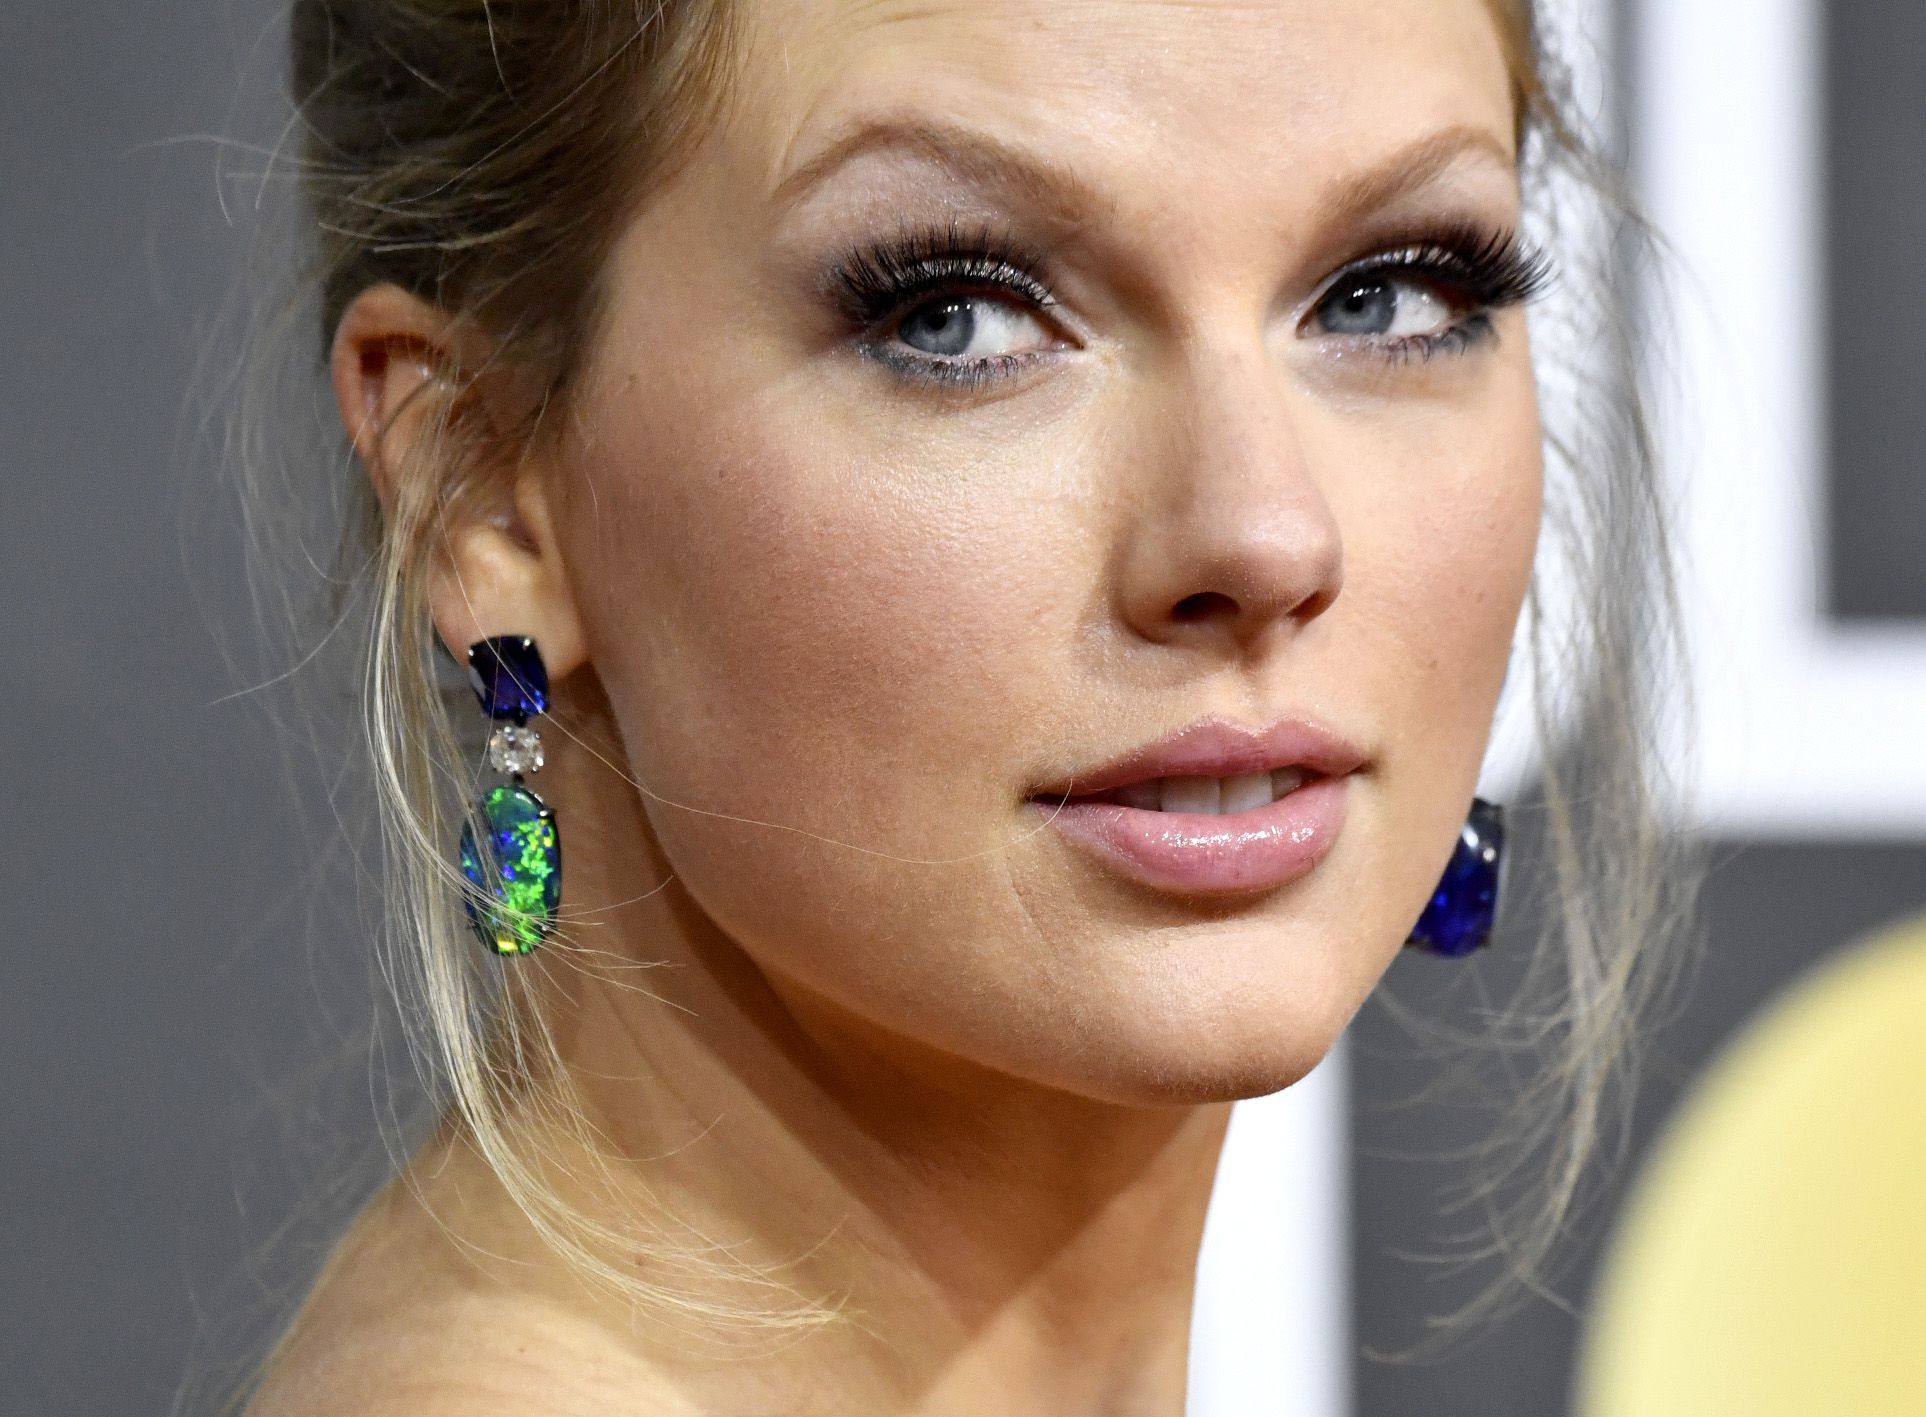 Facebook users following stars such as Taylor Swift were inundated with unwanted posts and their feeds almost completely clogged by fan comments. Photo: Getty Images